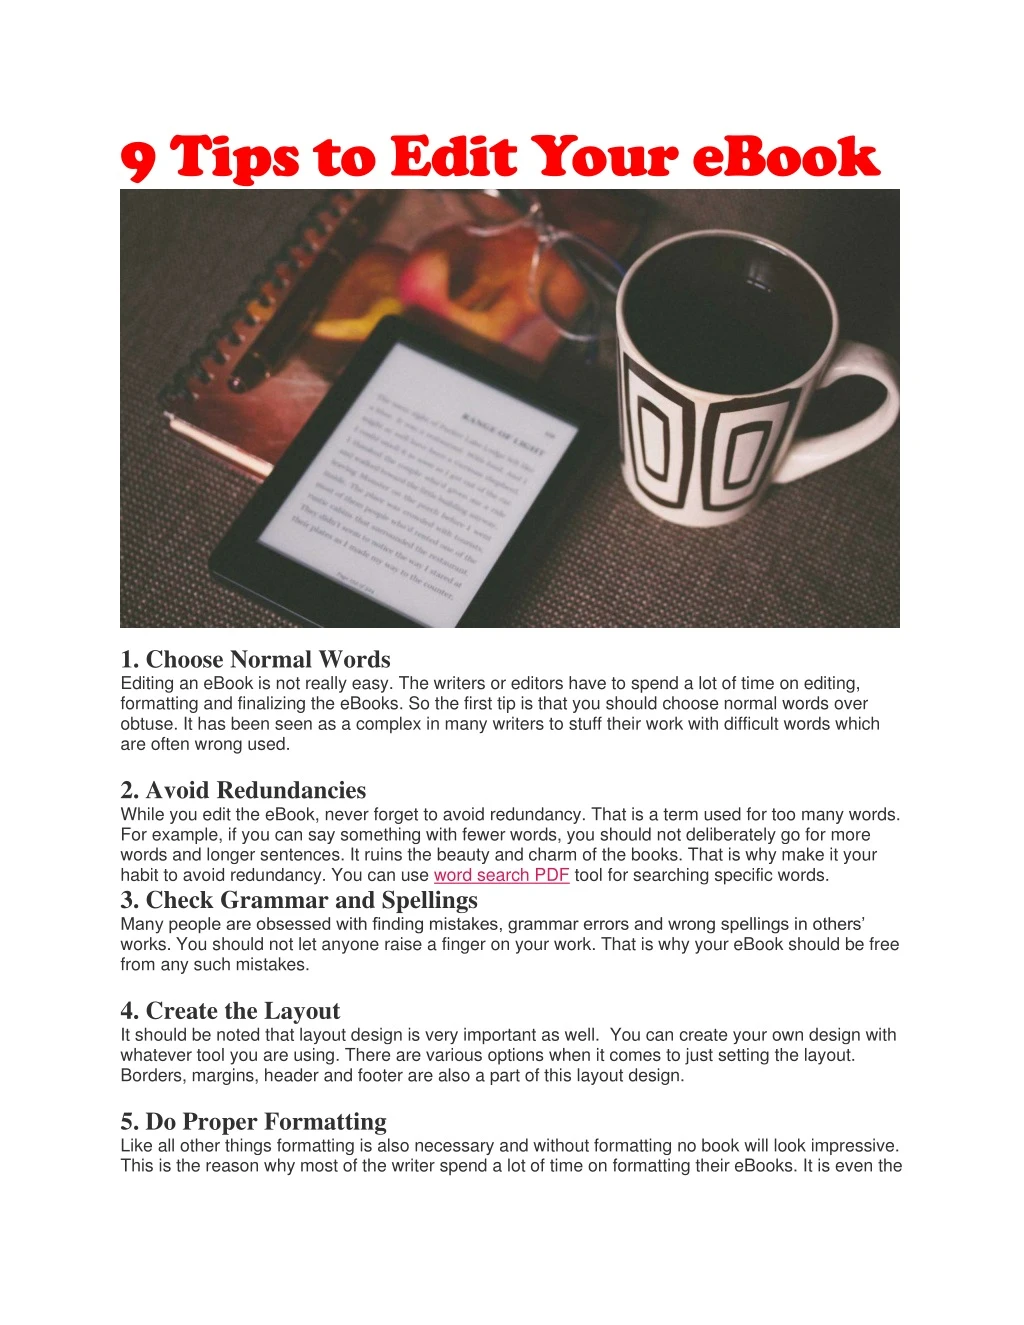 9 tips to edit your ebook